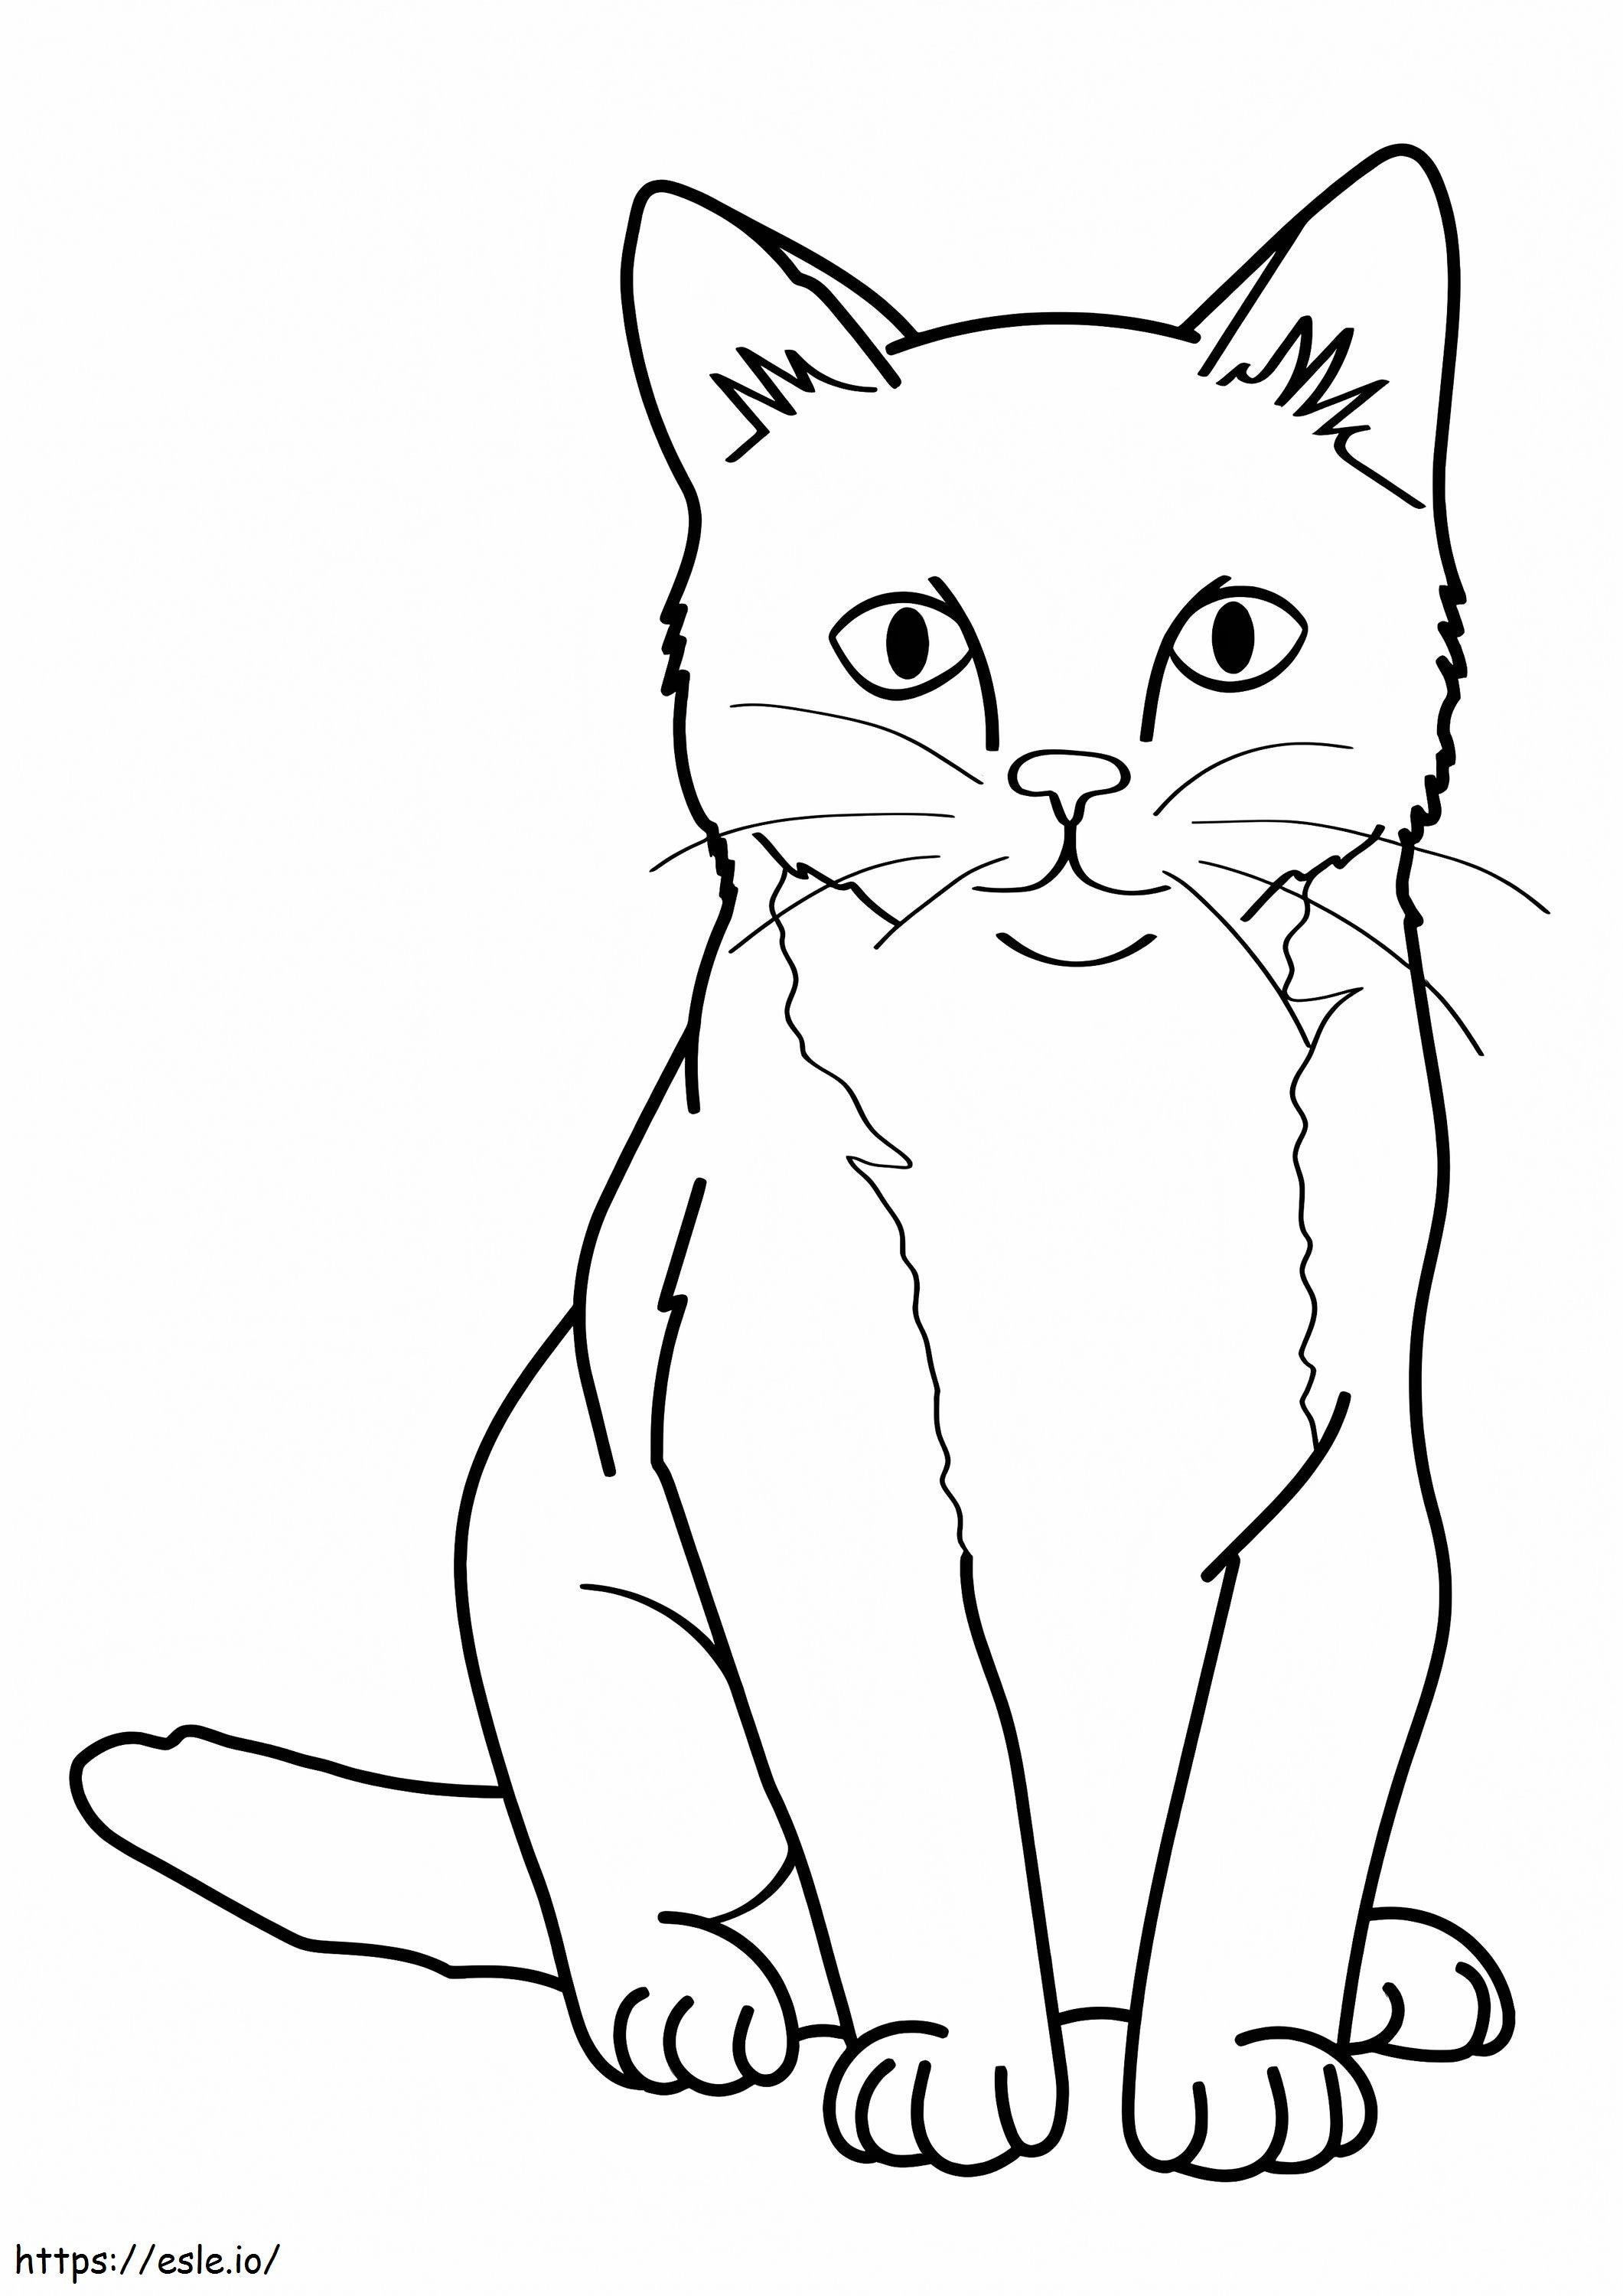 Basic Cat coloring page